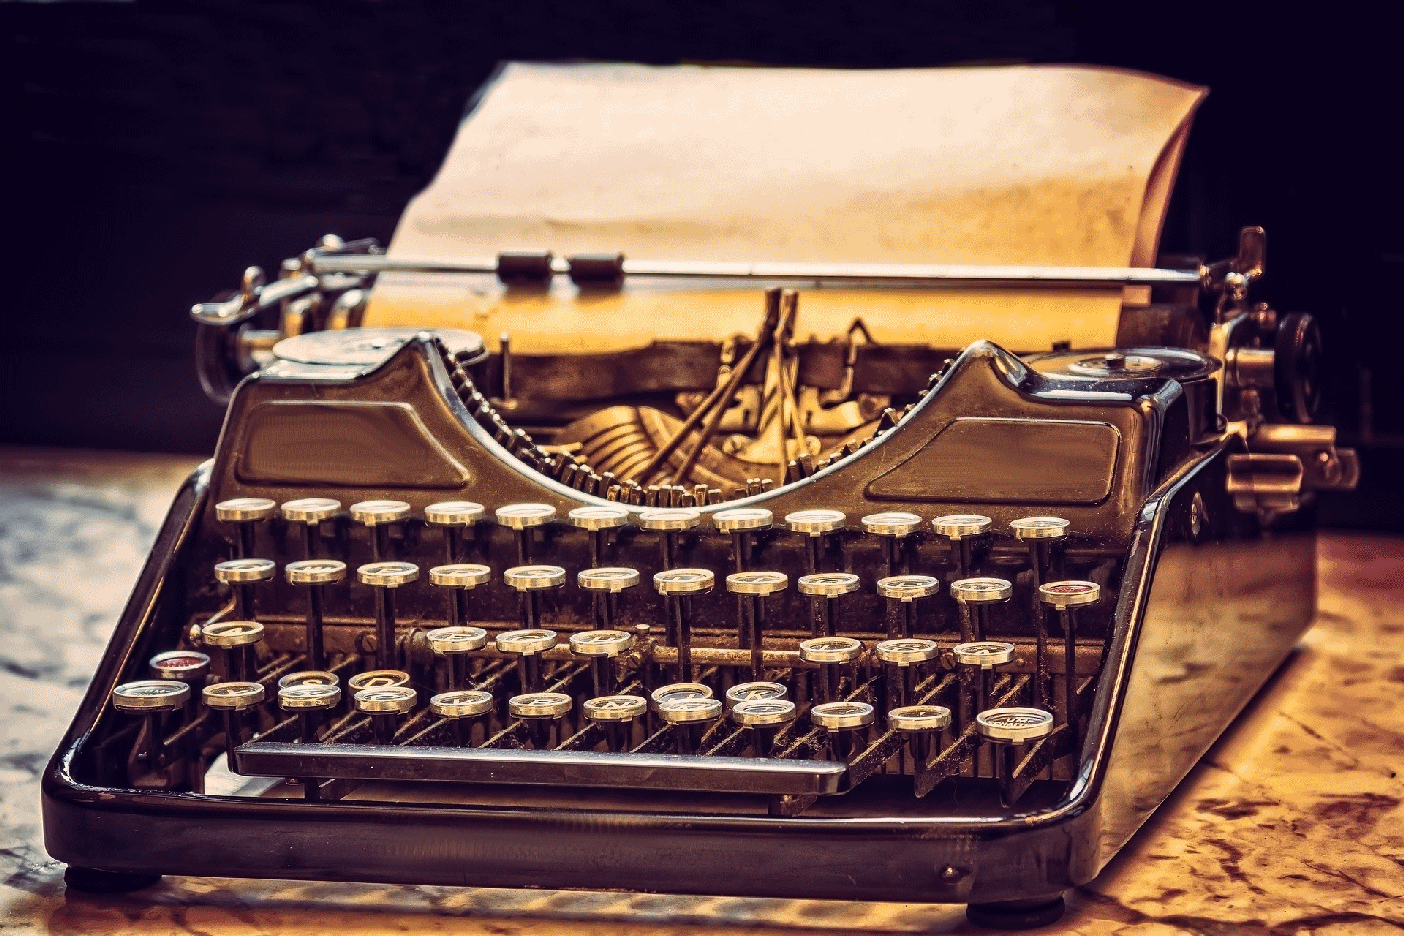 Edited photo of a typewriter, originally from Peter H at Pixabay